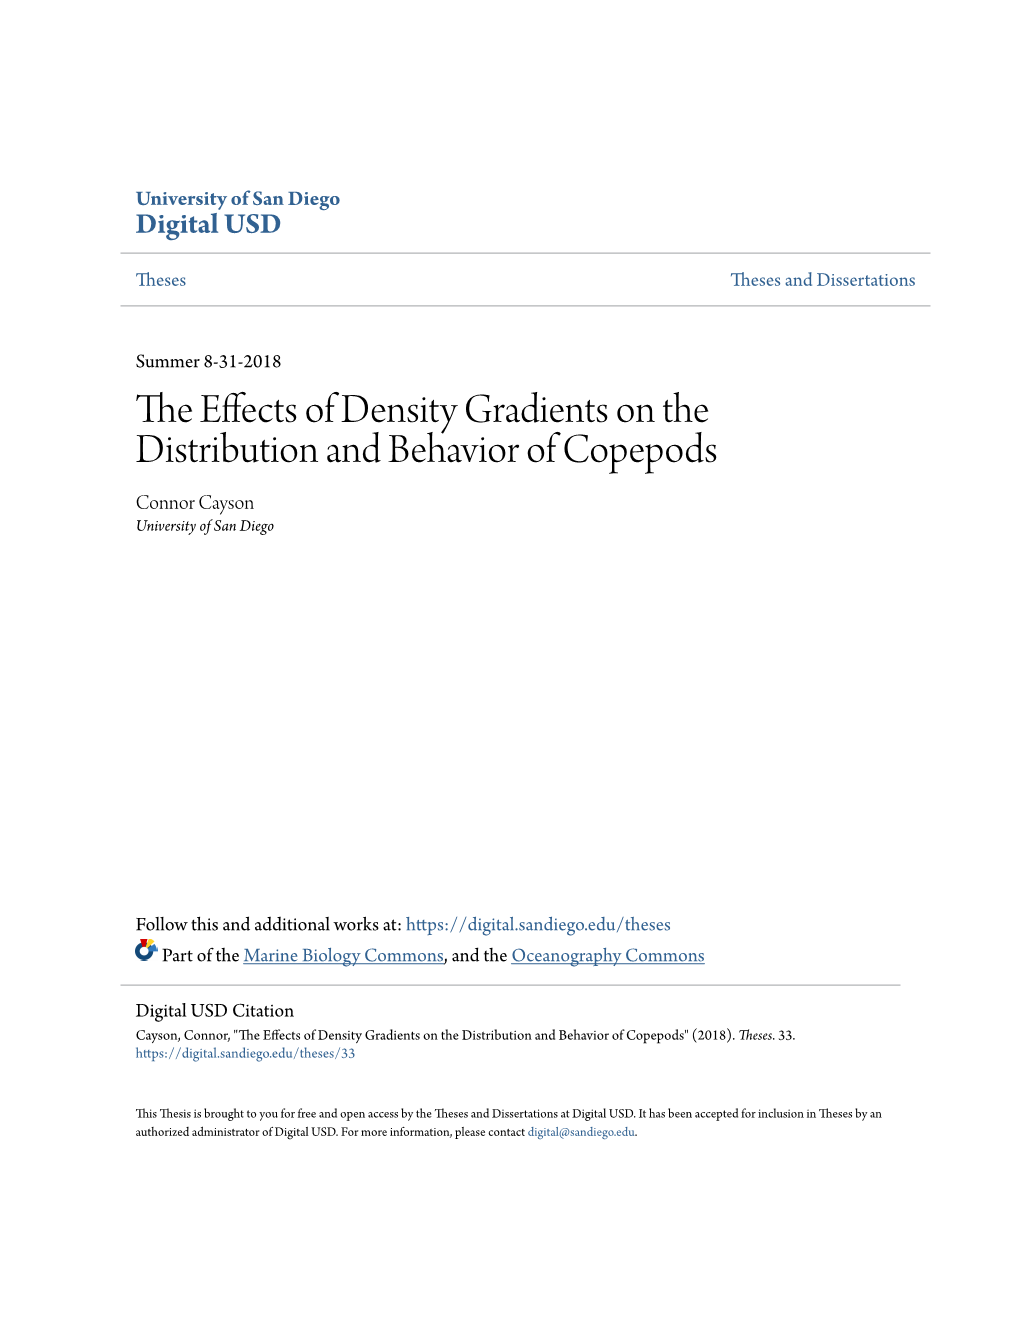 The Effects of Density Gradients on the Distribution and Behavior of Copepods" (2018)